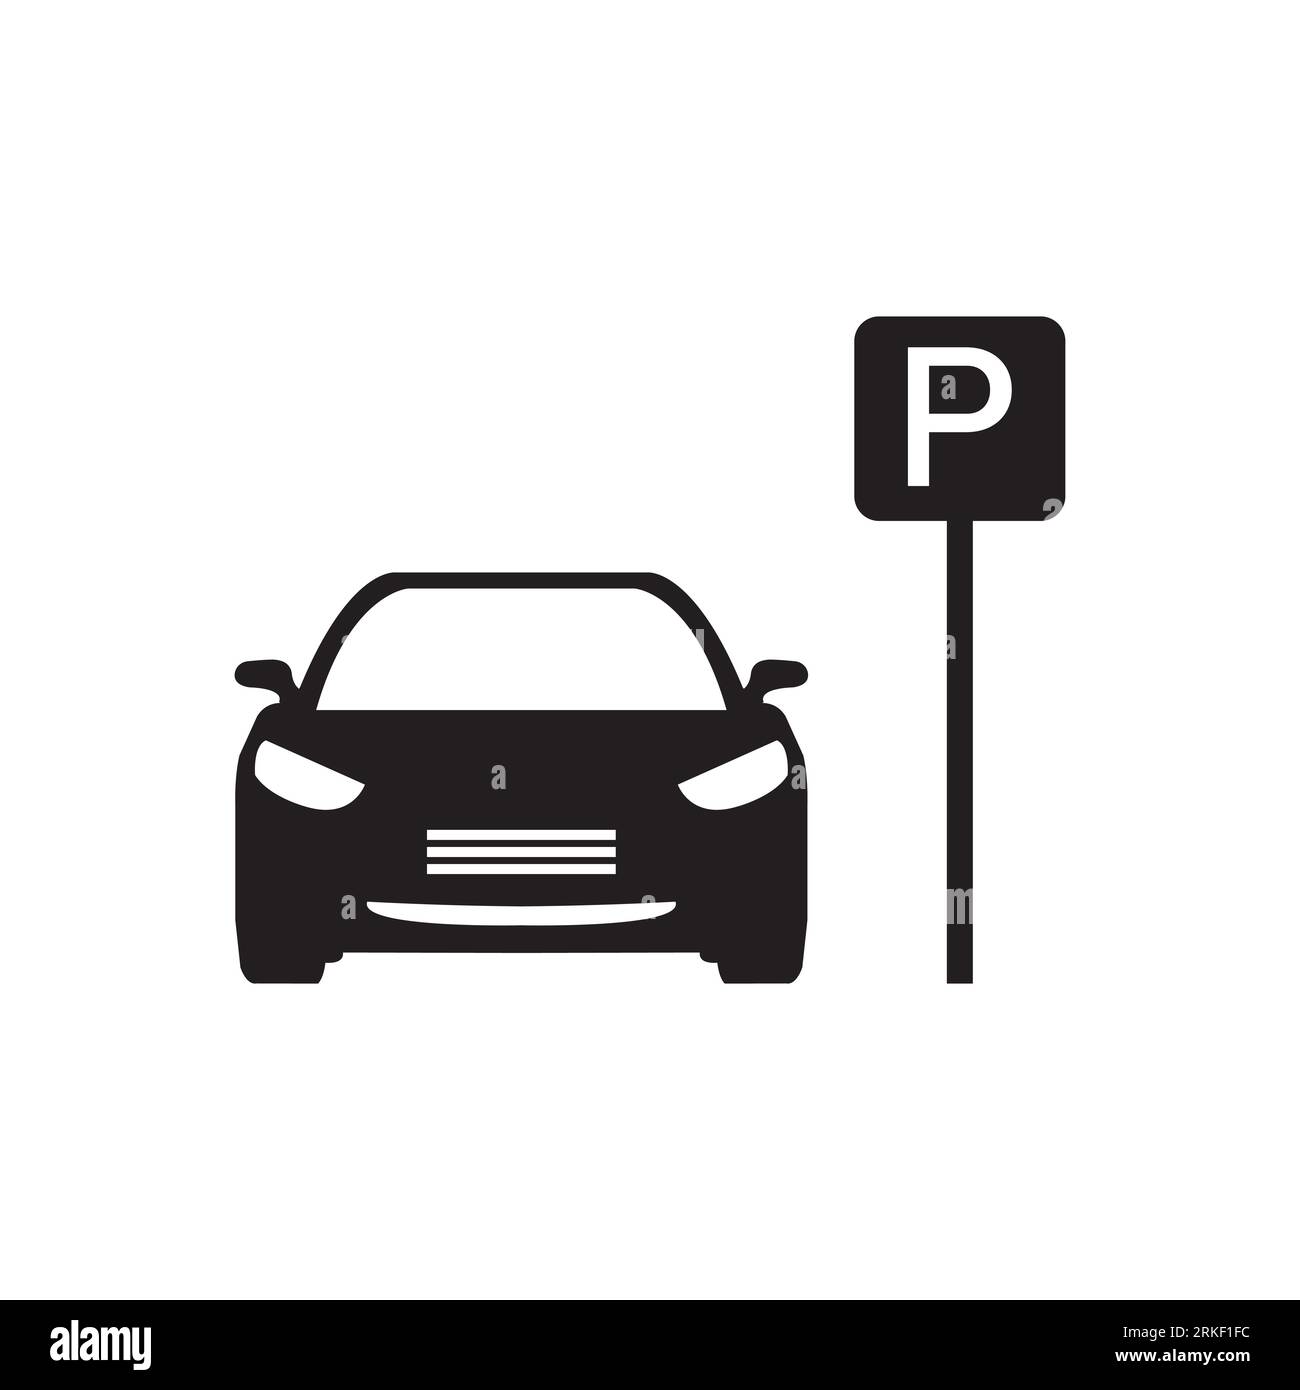 Car parking icon. Parking space. Parking lot. Car park. Vector icon isolated on white background. Stock Vector